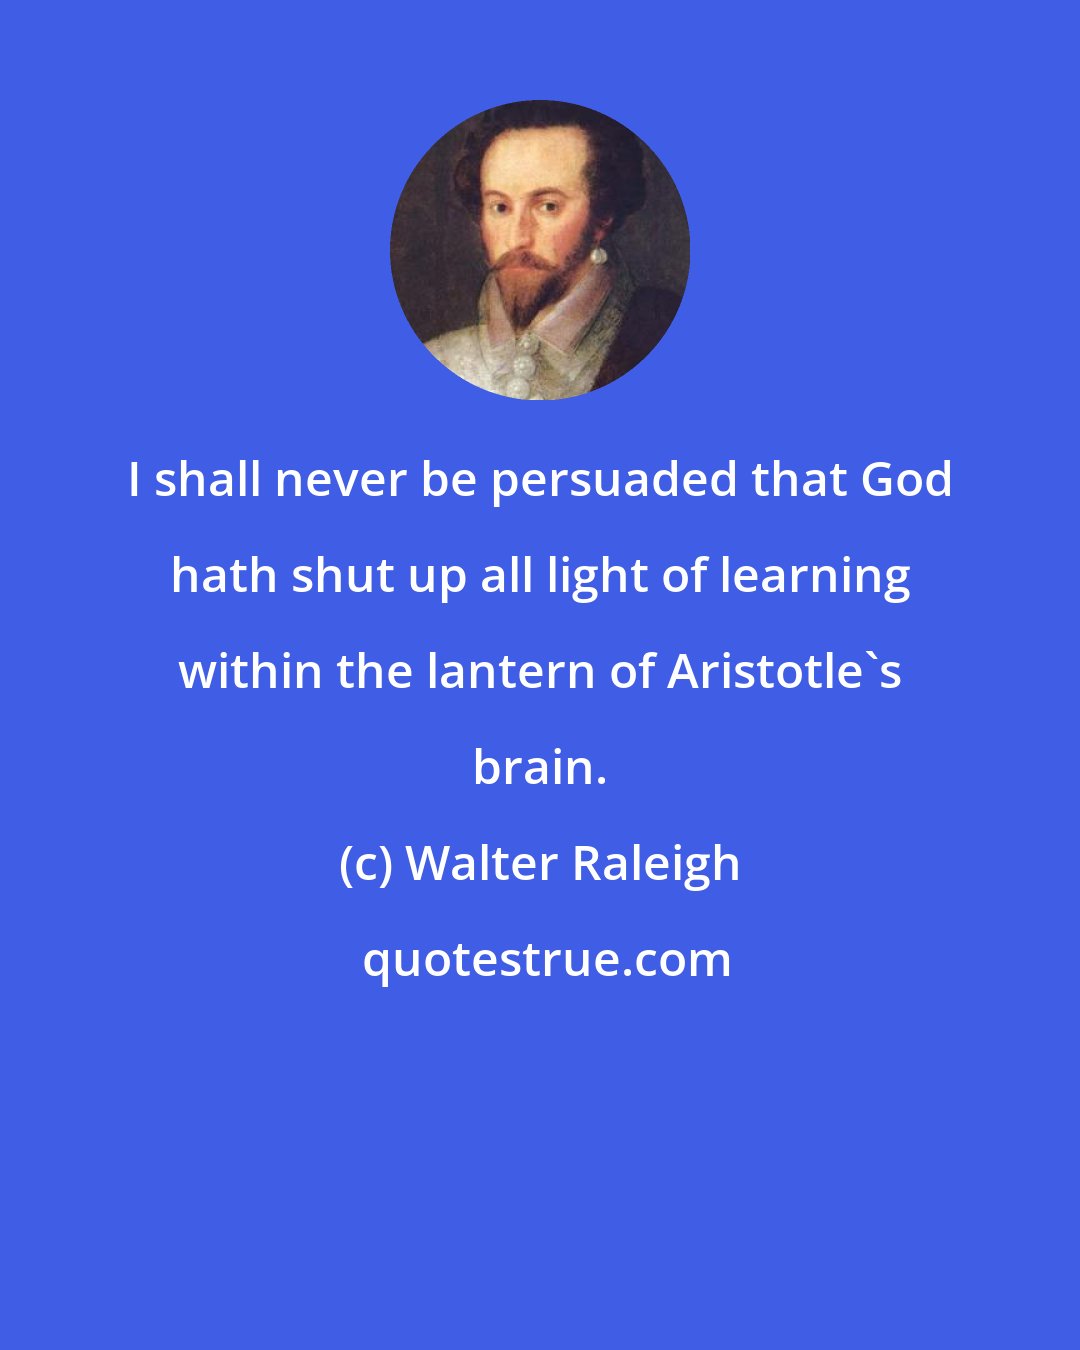 Walter Raleigh: I shall never be persuaded that God hath shut up all light of learning within the lantern of Aristotle's brain.